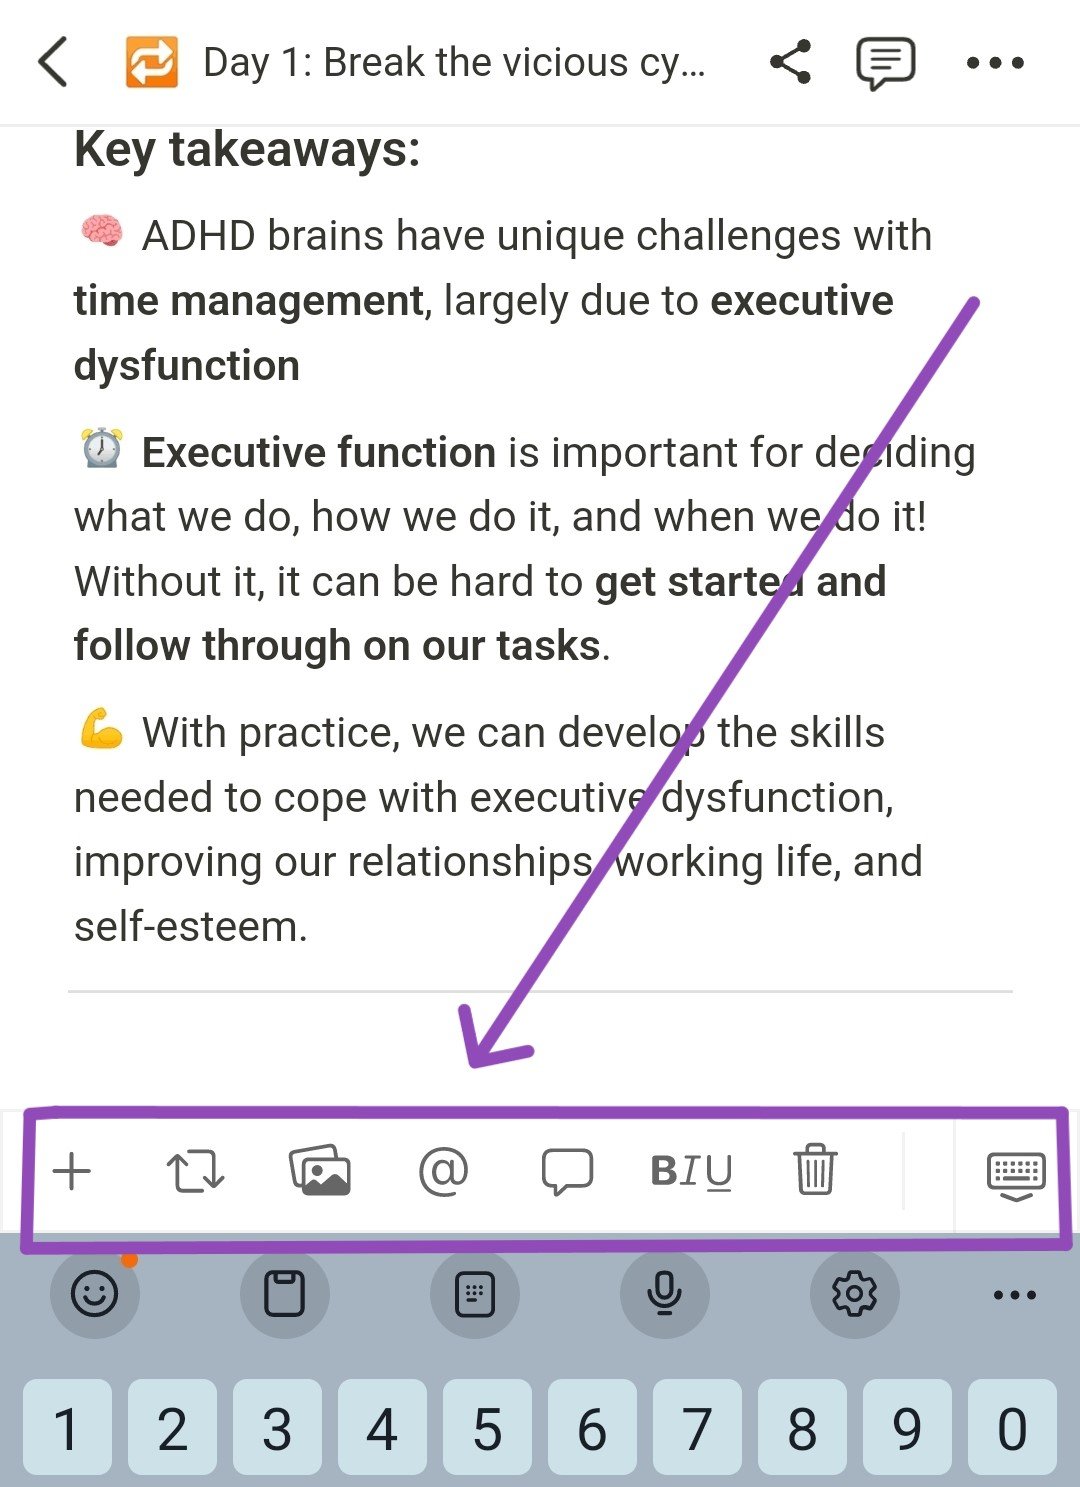 Notion database for Inflow, an ADHD app. Key takeaways document discussing executive dysfunction and time management. Arrow is pointing to a toolbar above the keyboard for mobile users on Notion. 